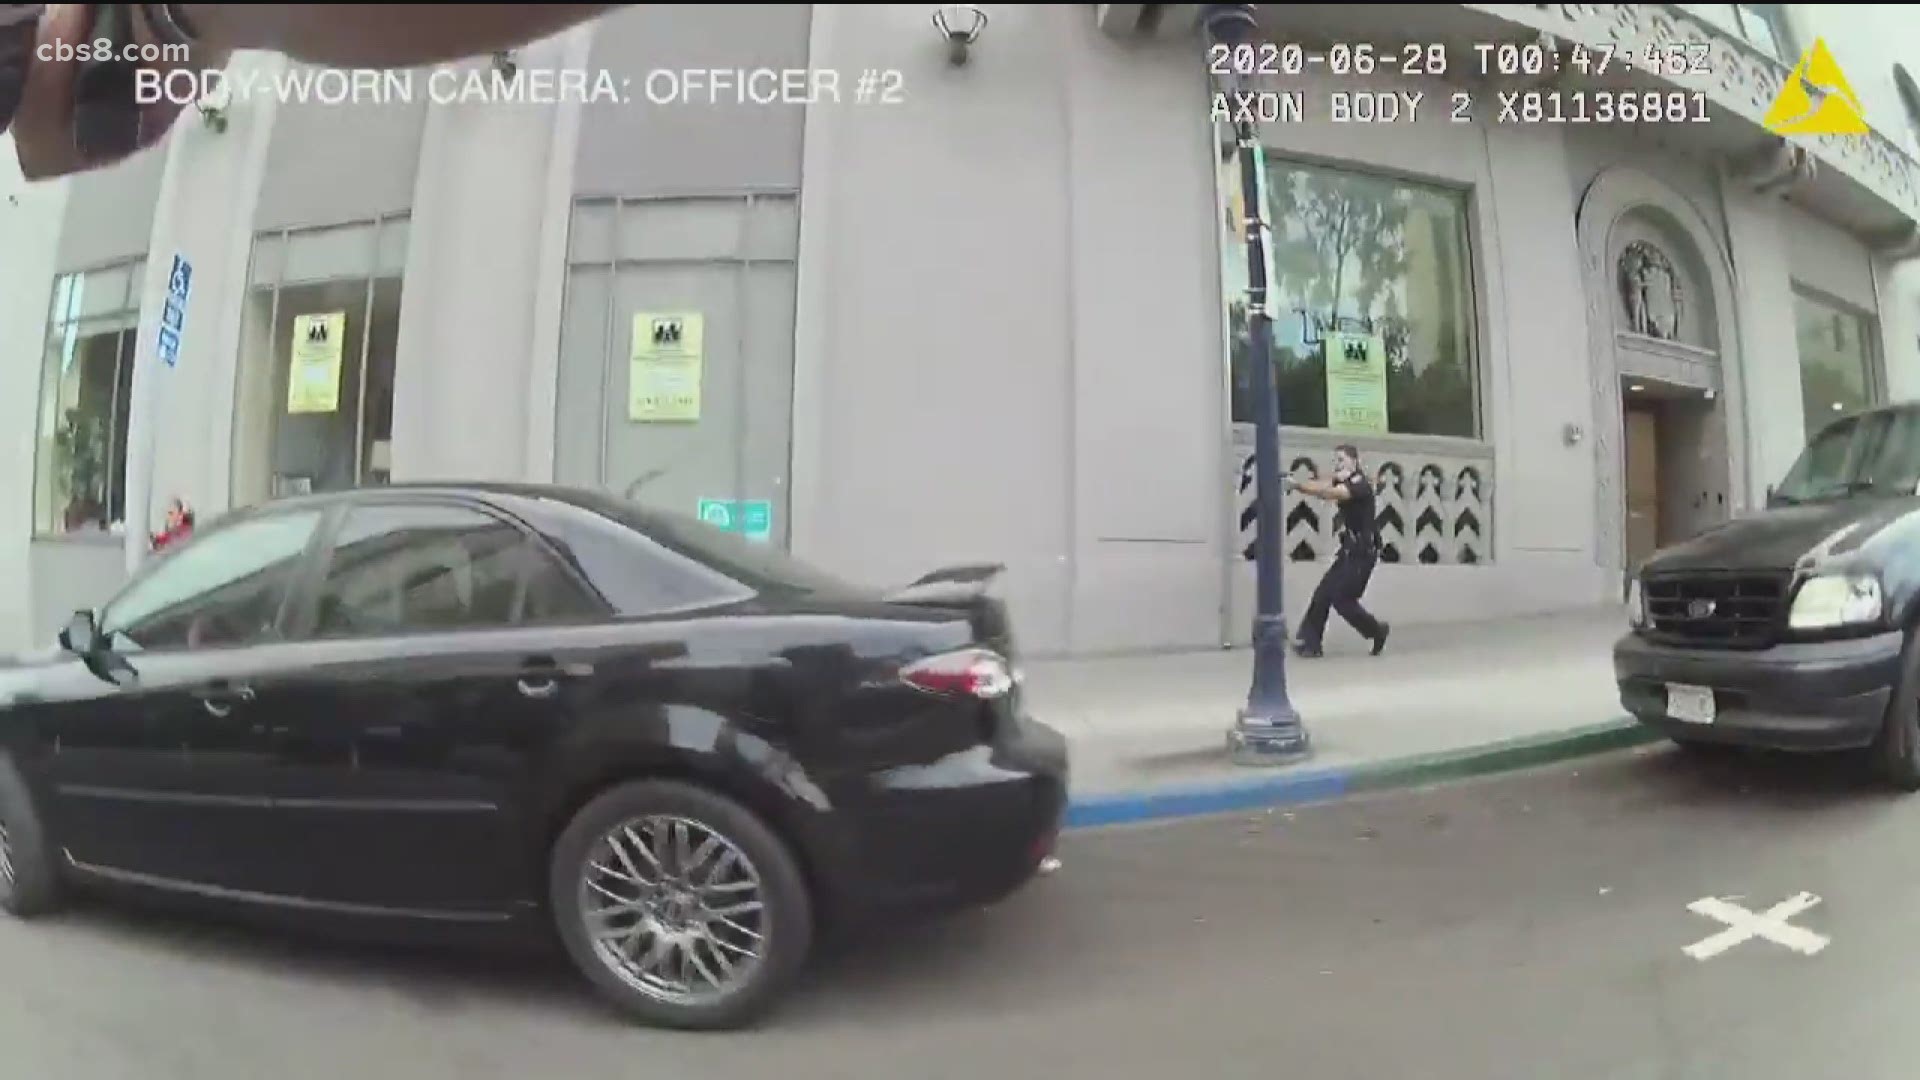 SDPD released what they called "critical incident video" of the shooting Sunday afternoon.